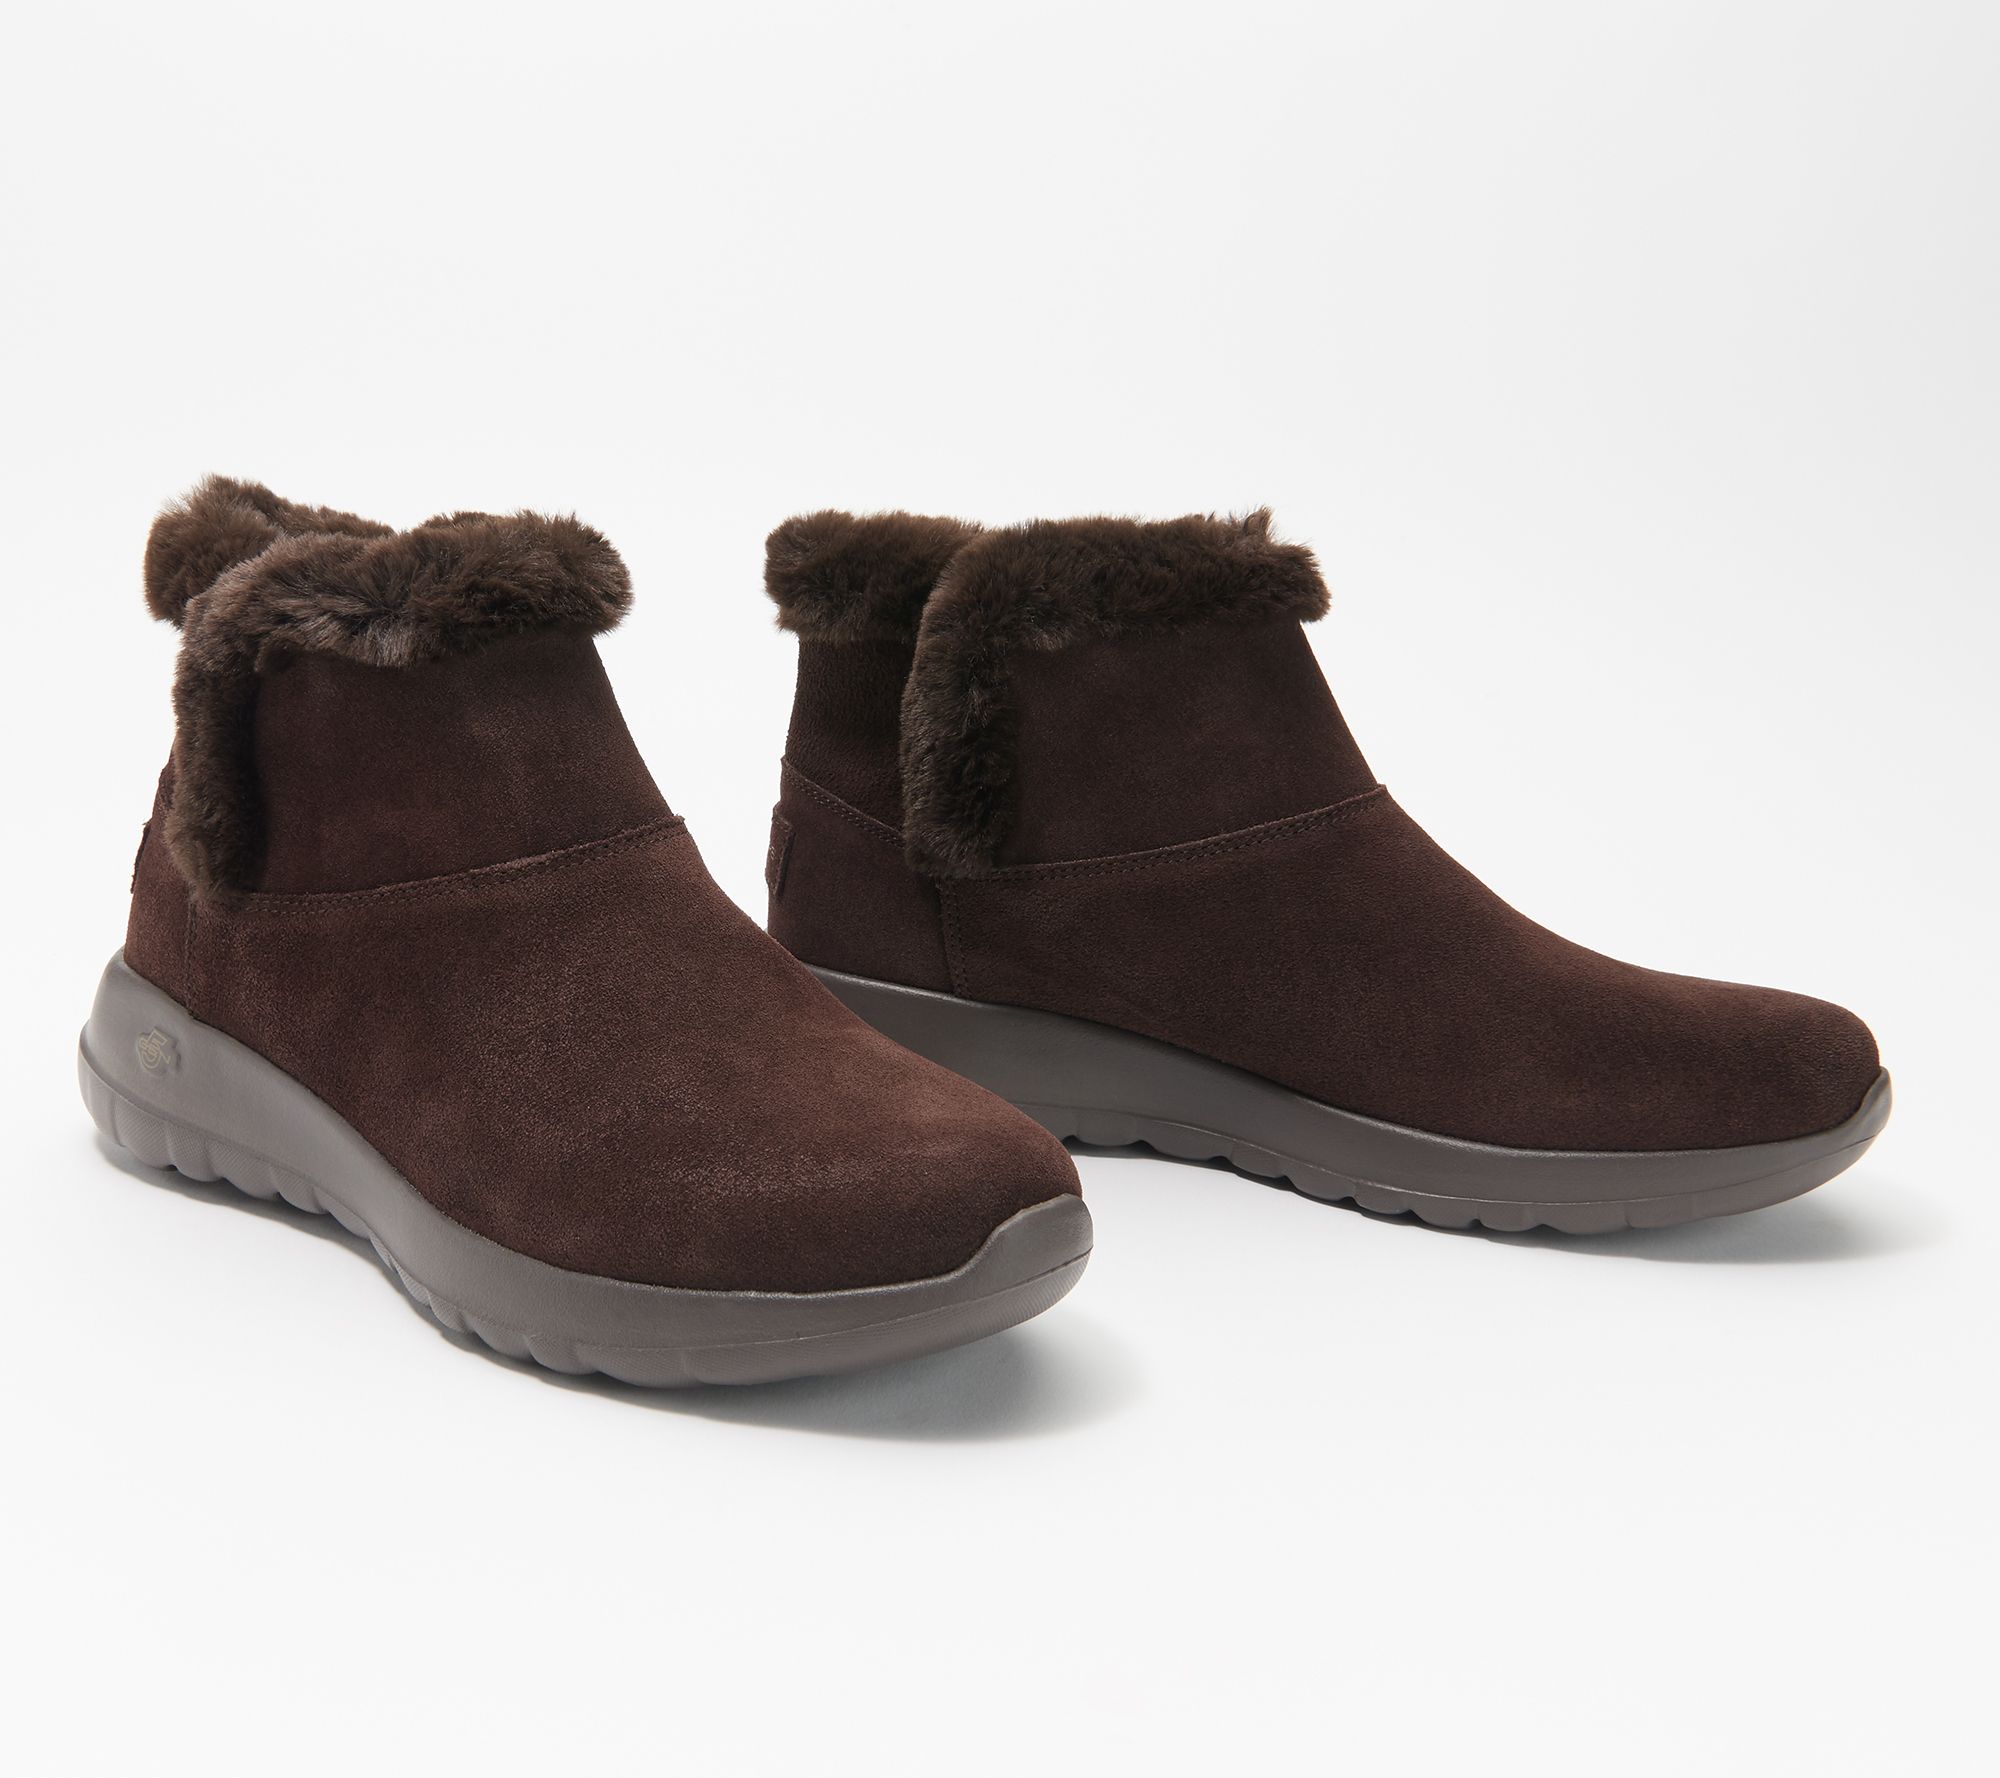 Terapia En riesgo ajo As Is" Skechers Solid On-the-Go Joy Bundle Up Ankle Boots - QVC.com